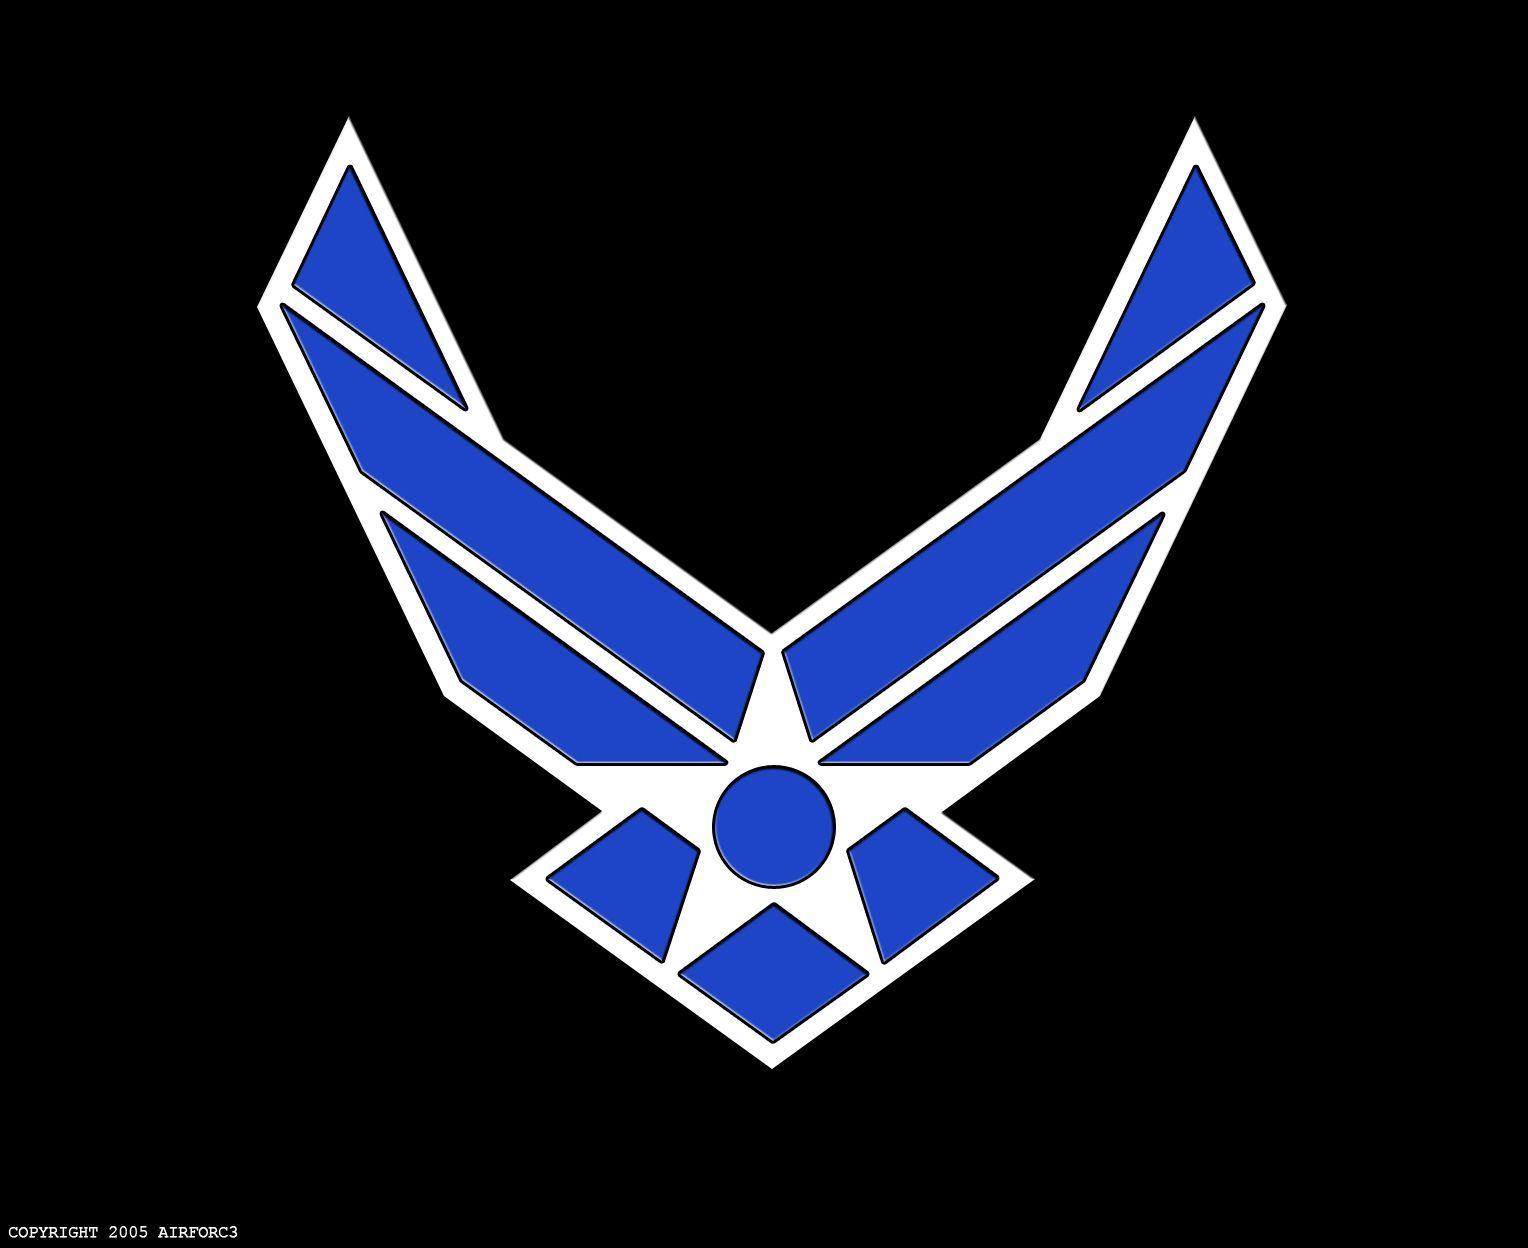 Air Force Logo Wallpapers Top Free Air Force Logo Backgrounds Wallpaperaccess